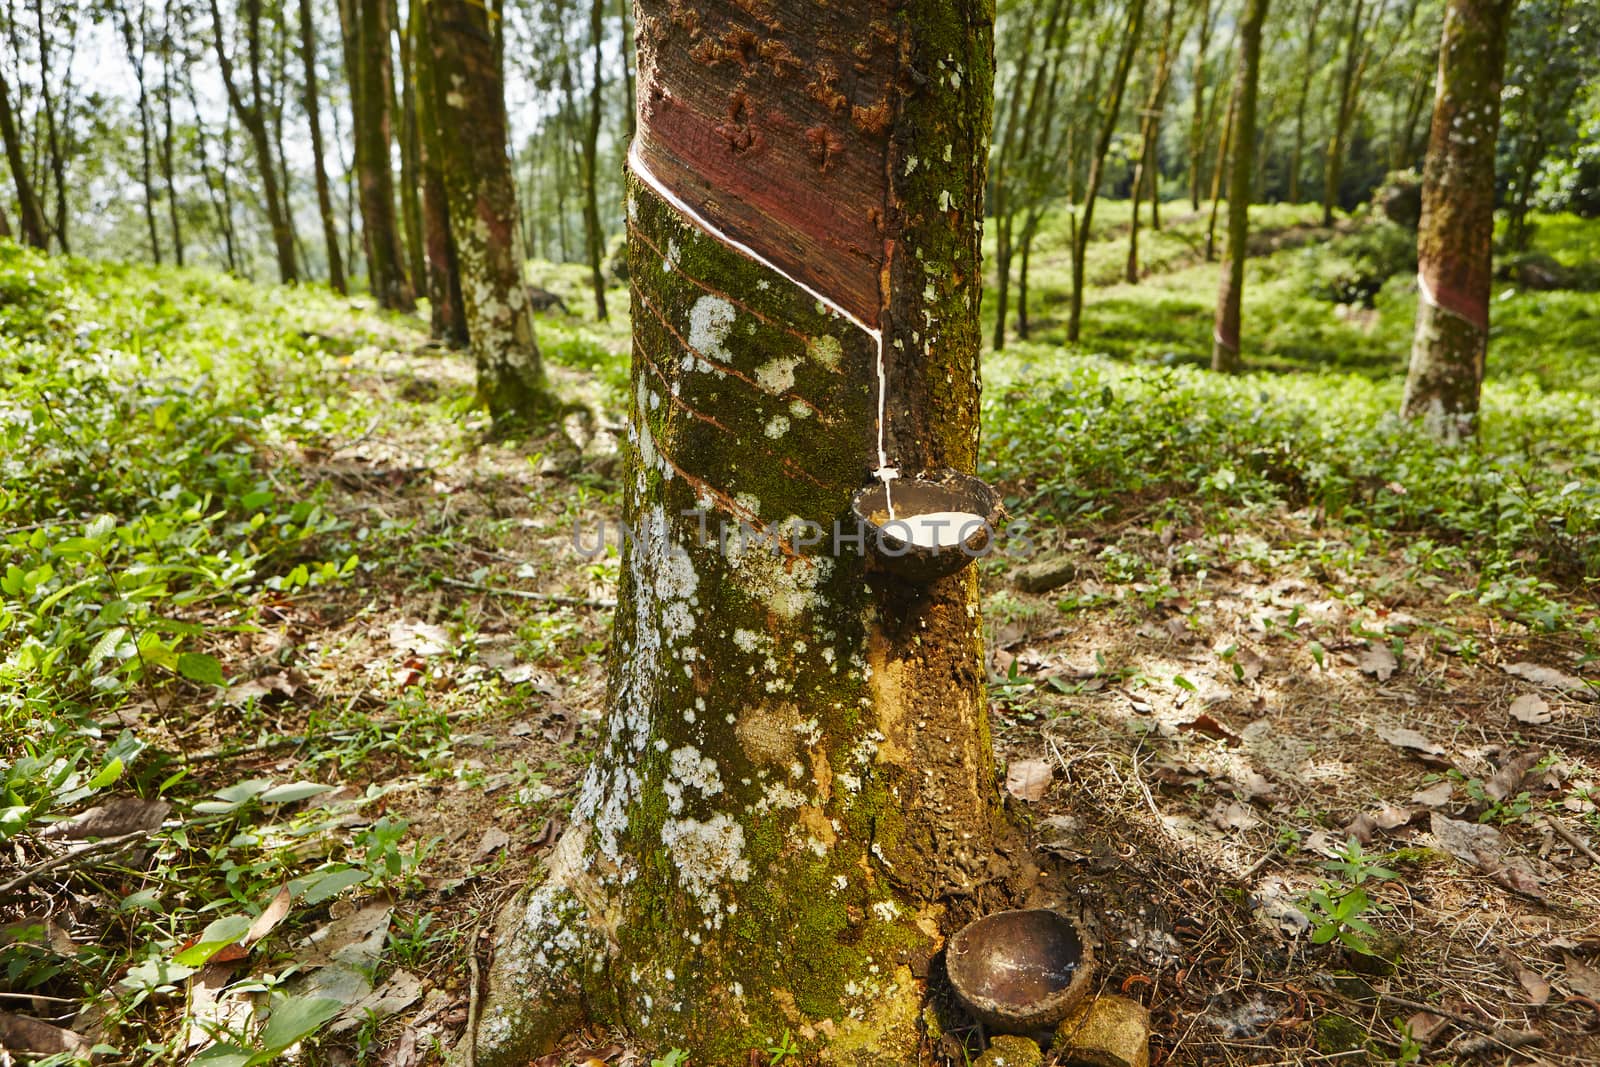 Tapping sap from the rubber tree in Sri Lanka